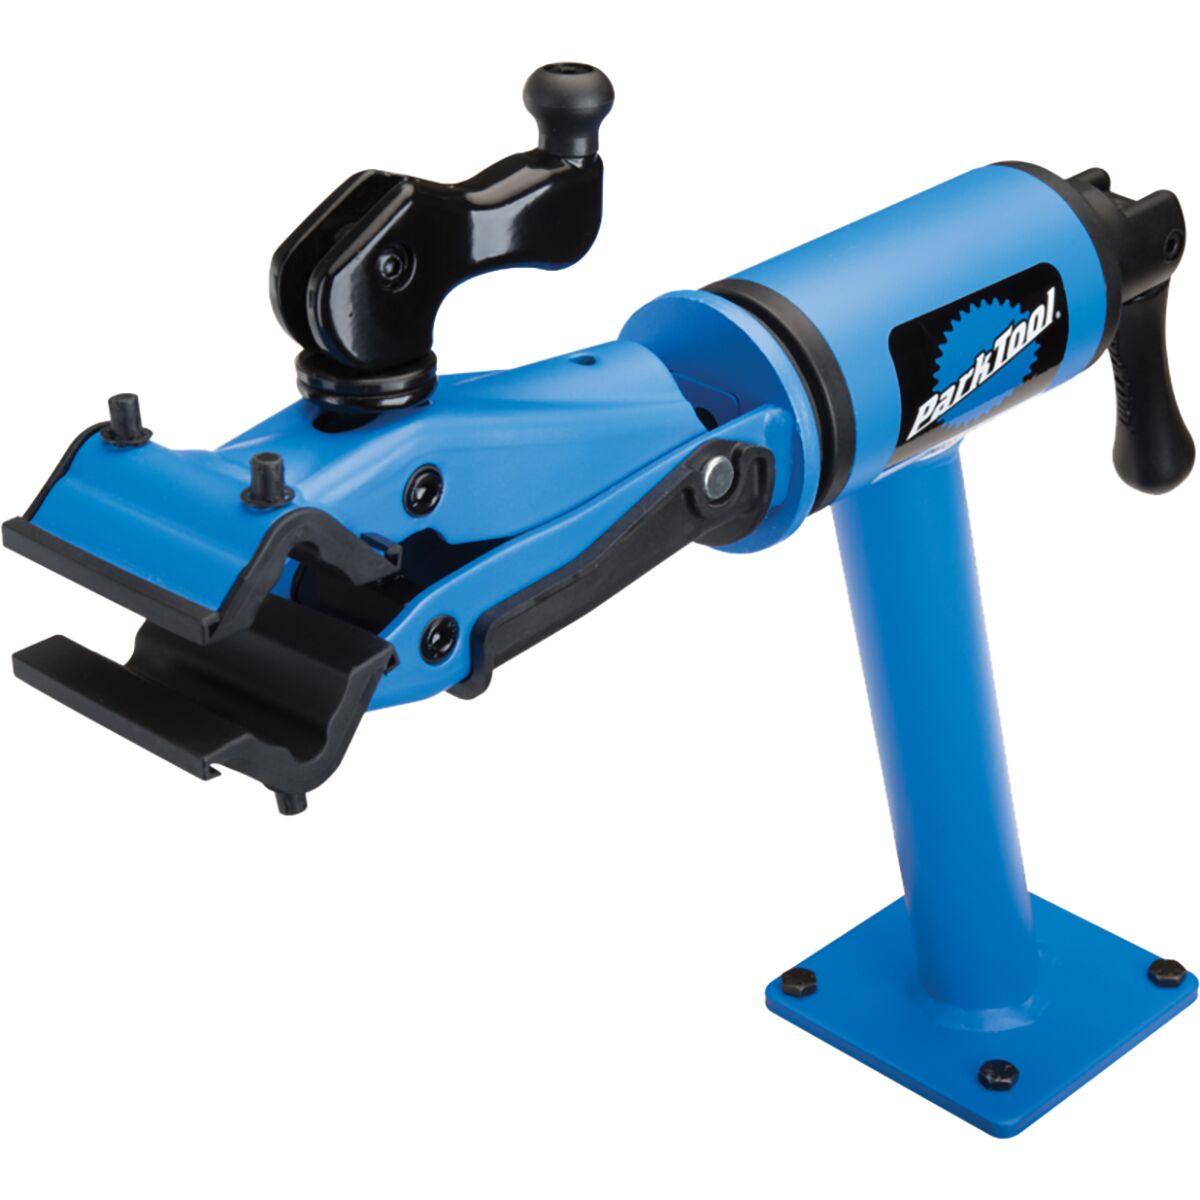 Park Tool PCS-12.2 Home Mechanic Bench Mount Repair Stand One Color, One Size -  902015-01